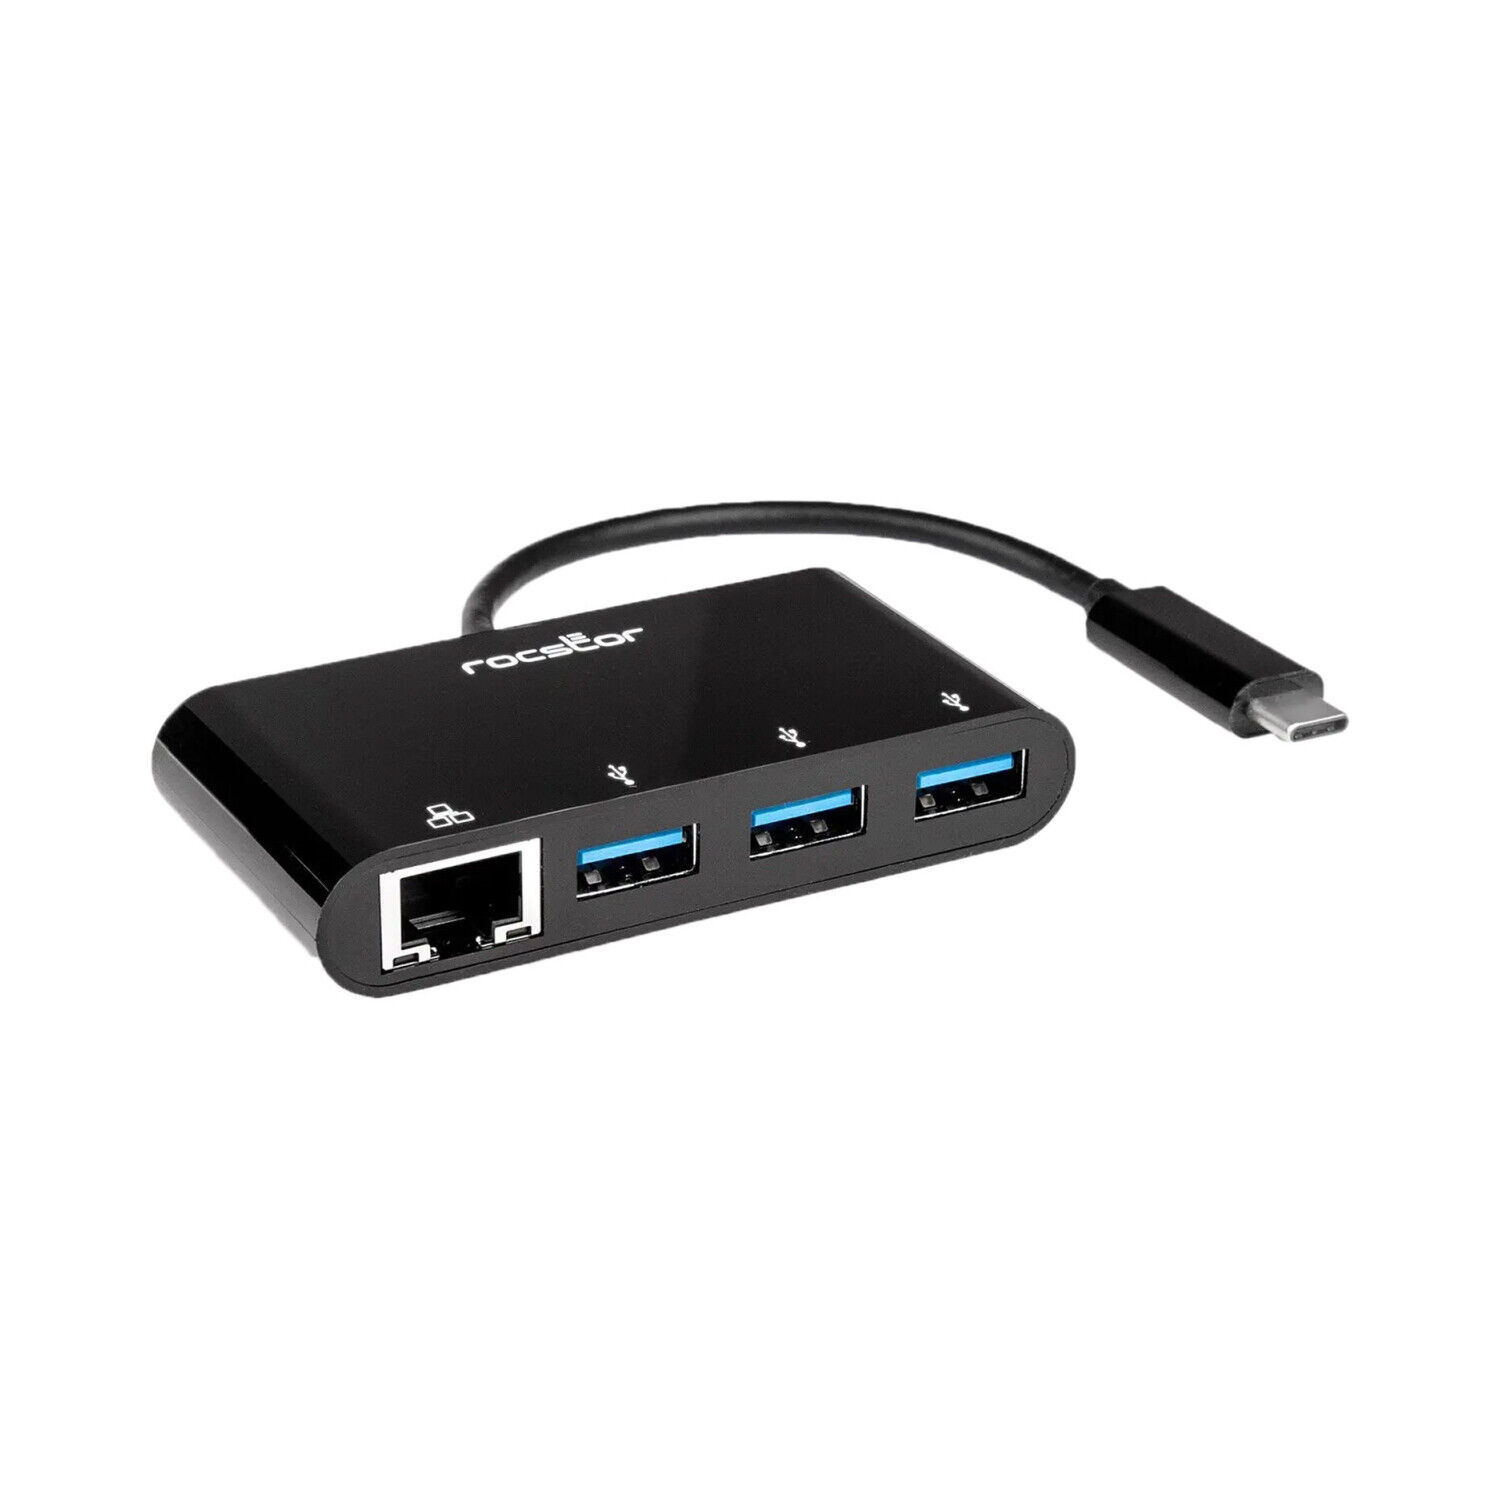 Primary image for ROCSTOR Y10A251-B1 3 PORT USB C HUB WITH GBE RJ45